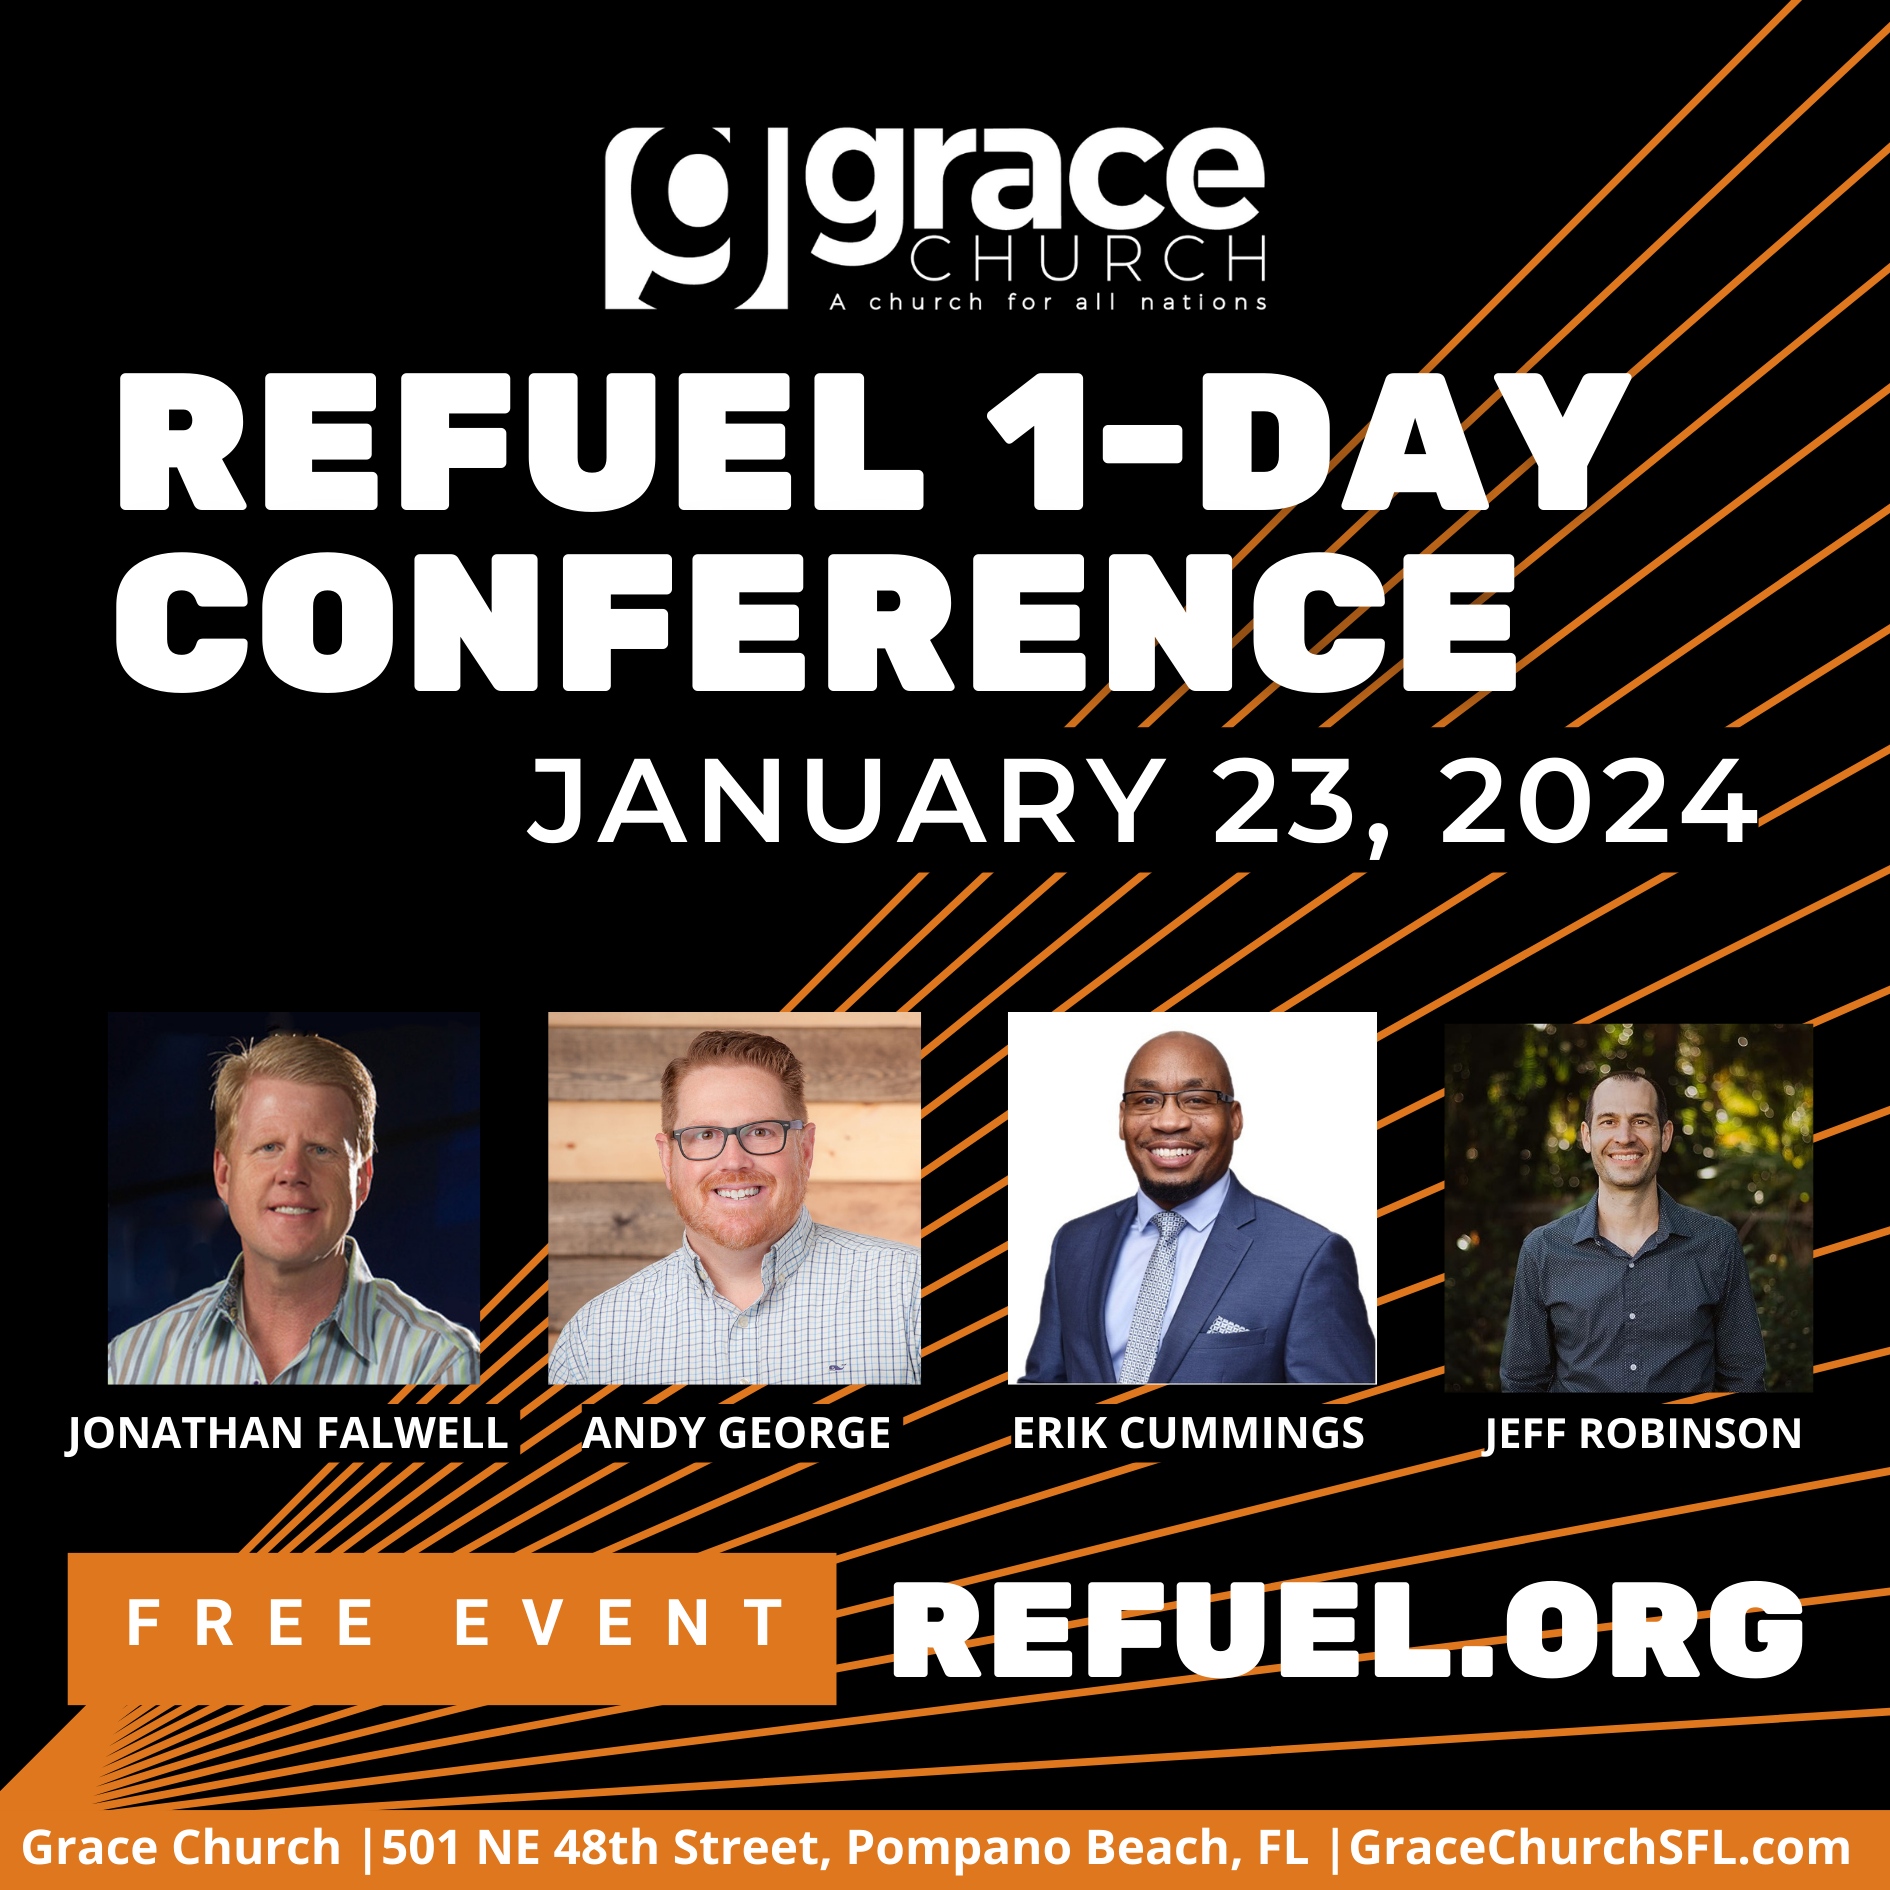 Refuel 1Day Conference Good News Christian NewsGood News Christian News